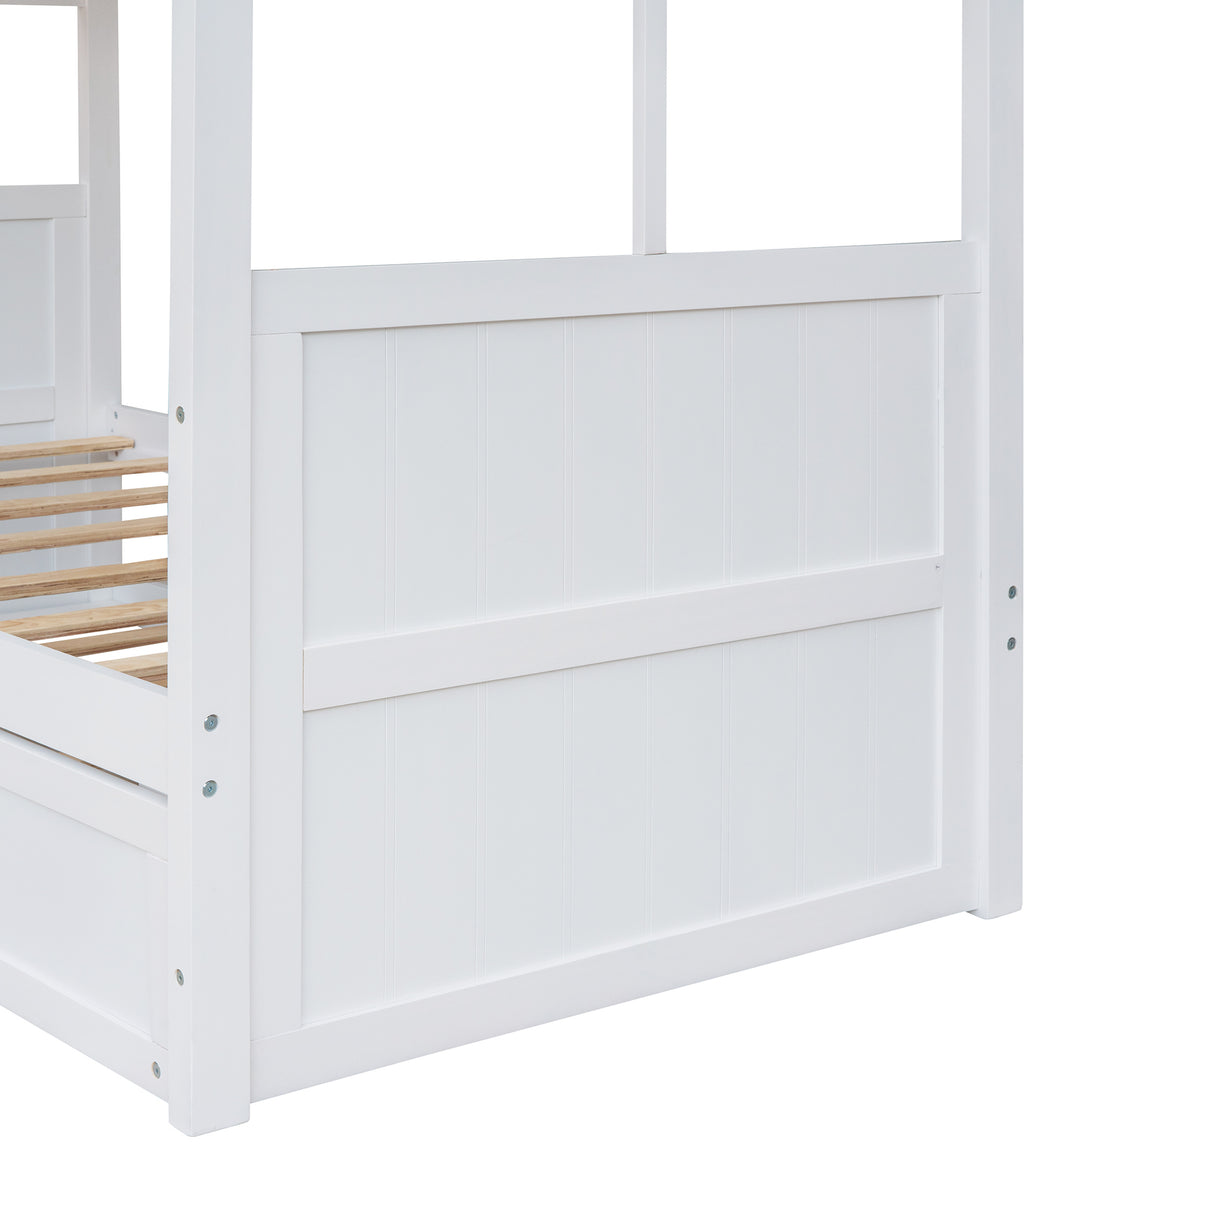 Twin Size Wood House Bed With Twin Size Trundle, Wooden Daybed, White